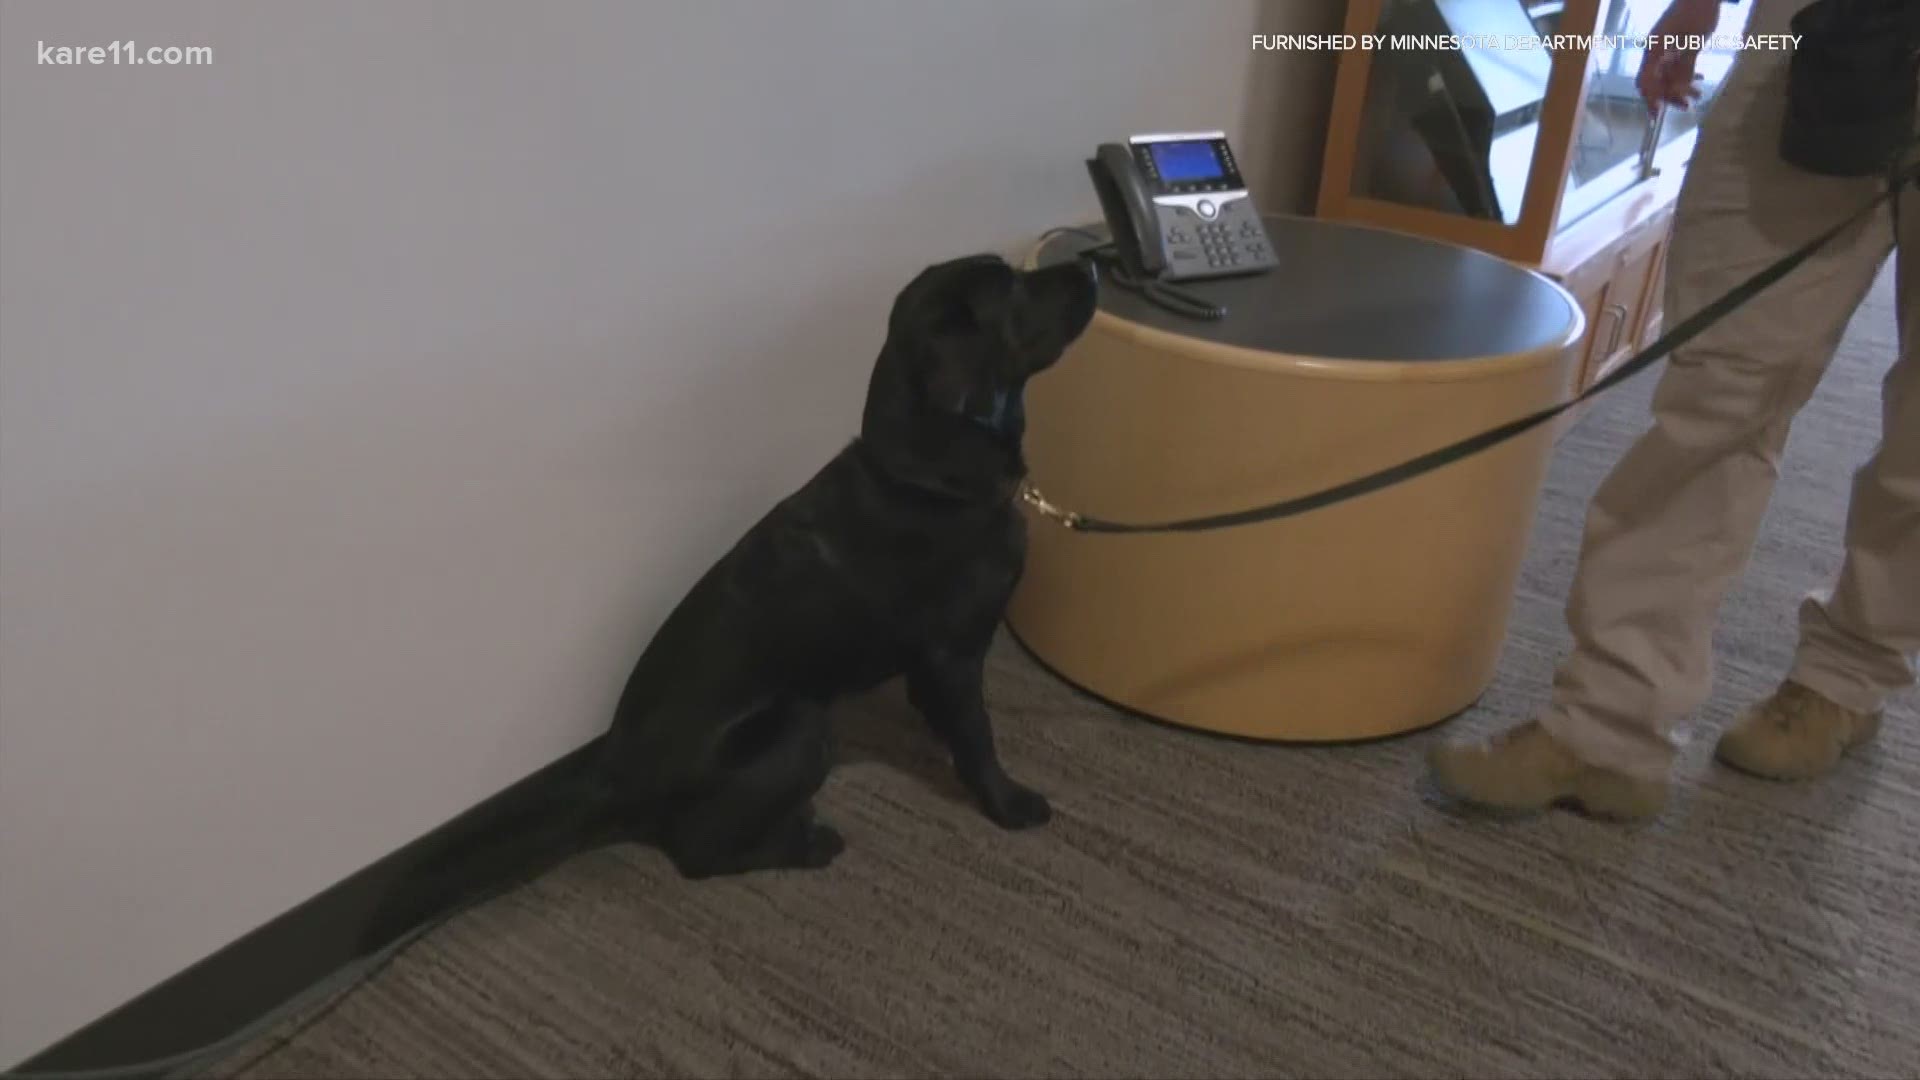 The BCA has recruited a 2-year-old black British Labrador, named Sota, the first electronic detection K-9 in the state of Minnesota